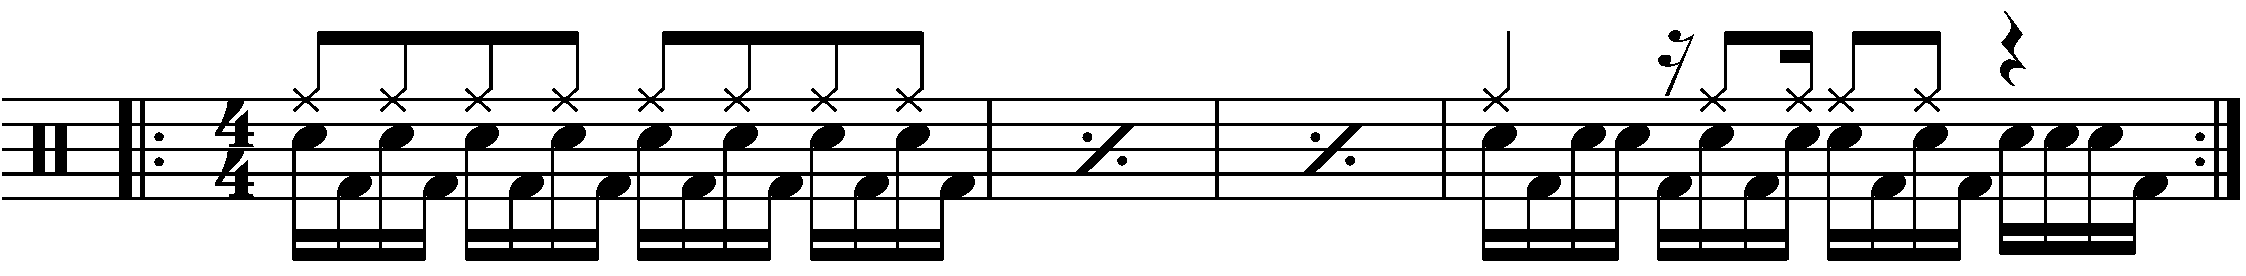 A four bar phrase built around reverse sub divided eighth note blast beats